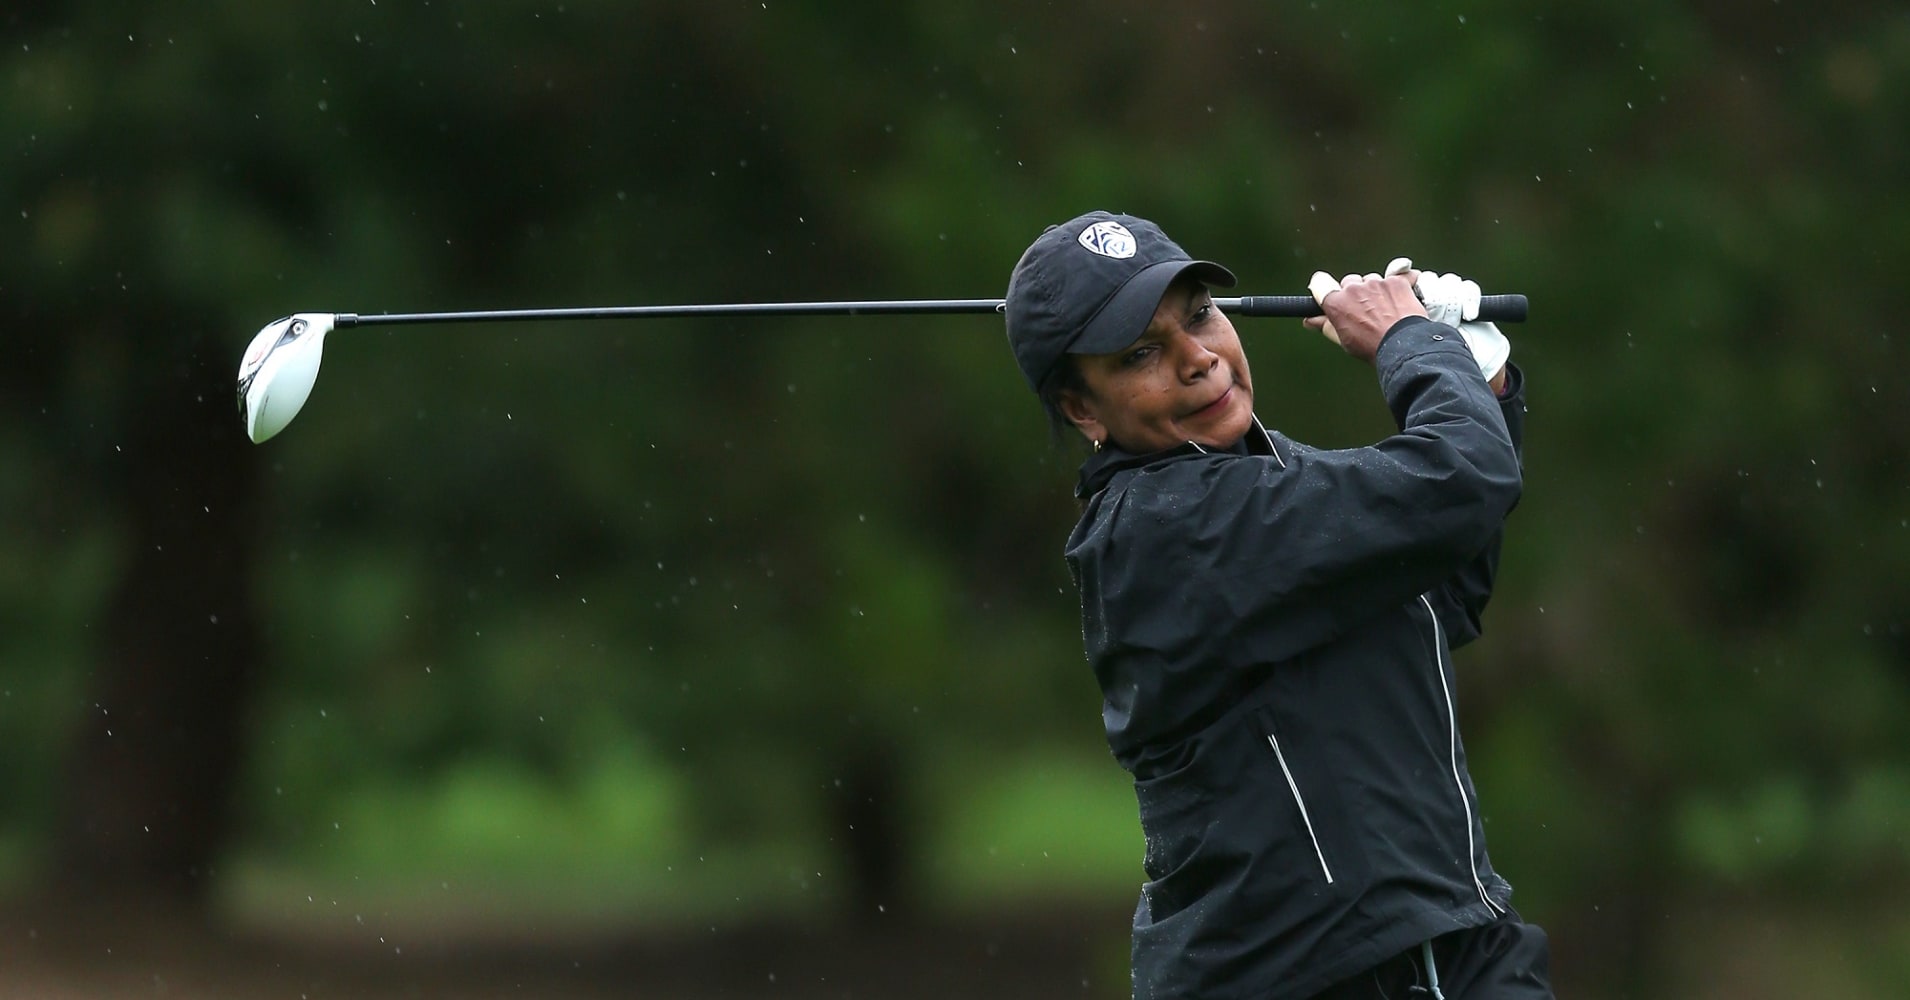 Former United States Secretary of State Condoleezza Rice hits an approach shot to the tenth green during the third round of the AT&T Pebble Beach National Pro-Am.